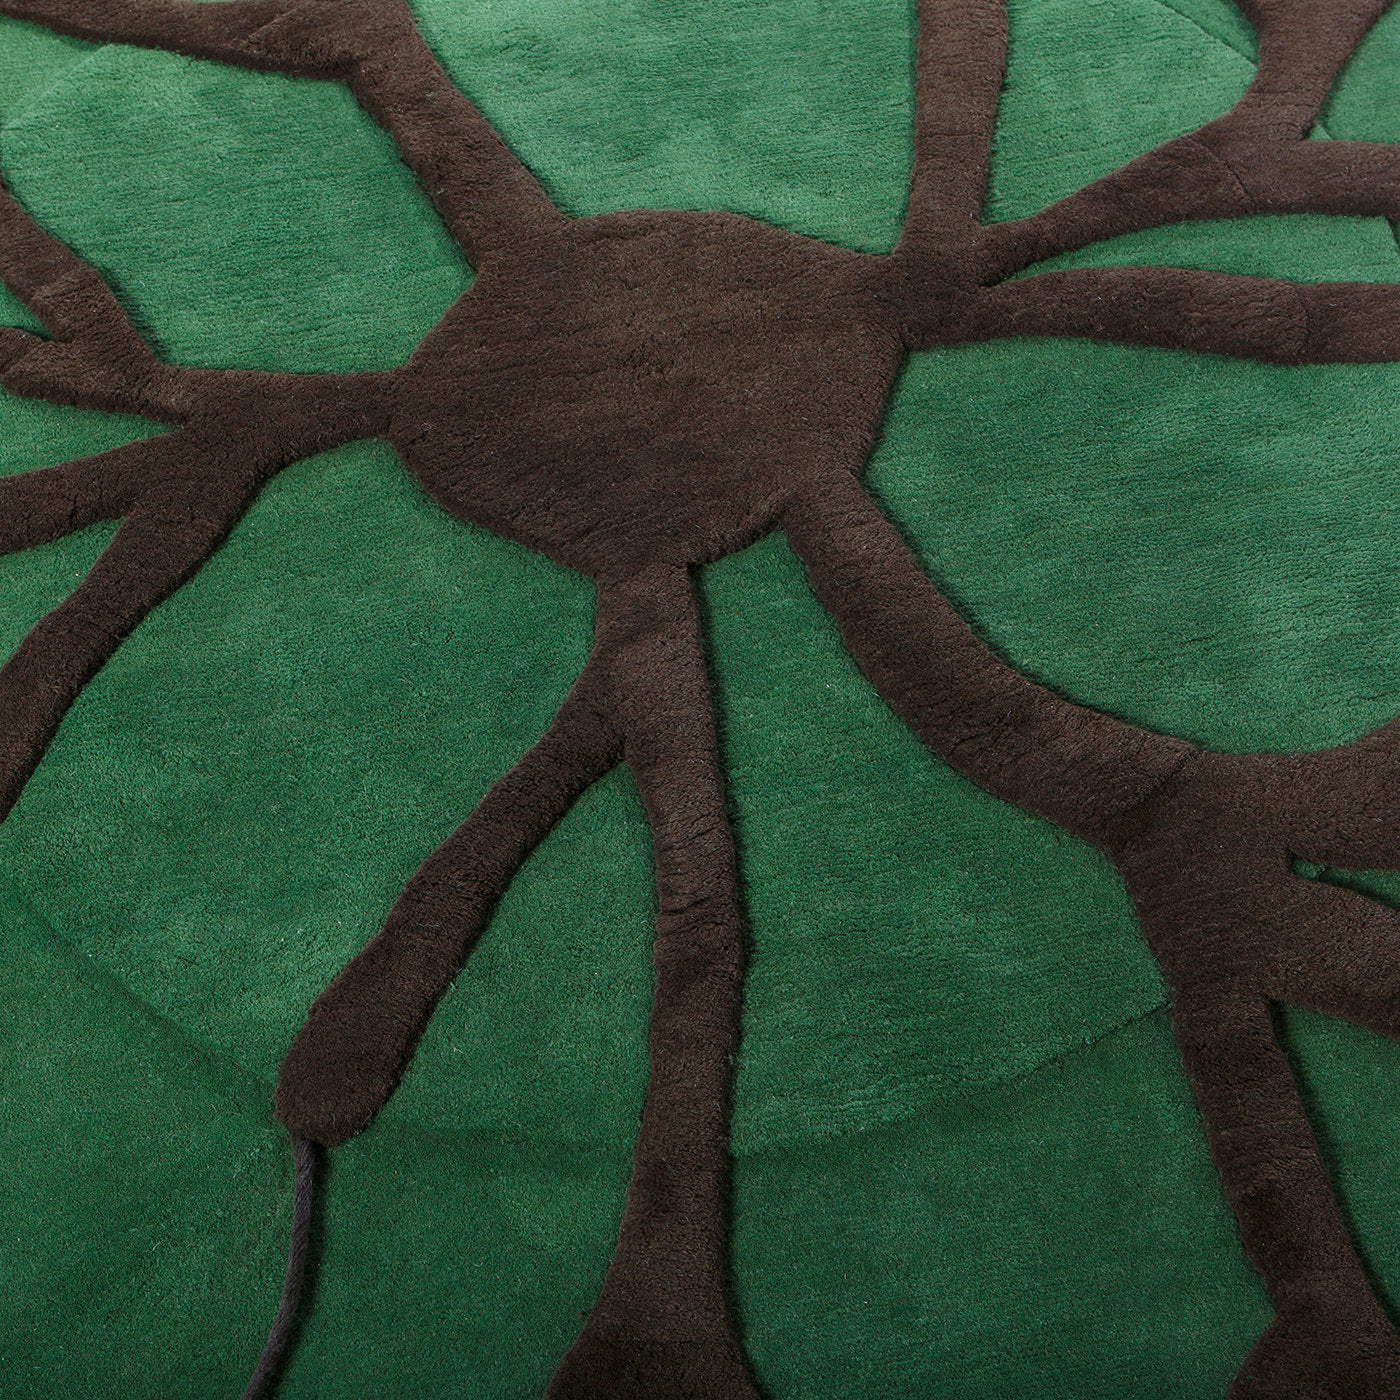 Roots Rug by Matali Crasset - Alternative view 4